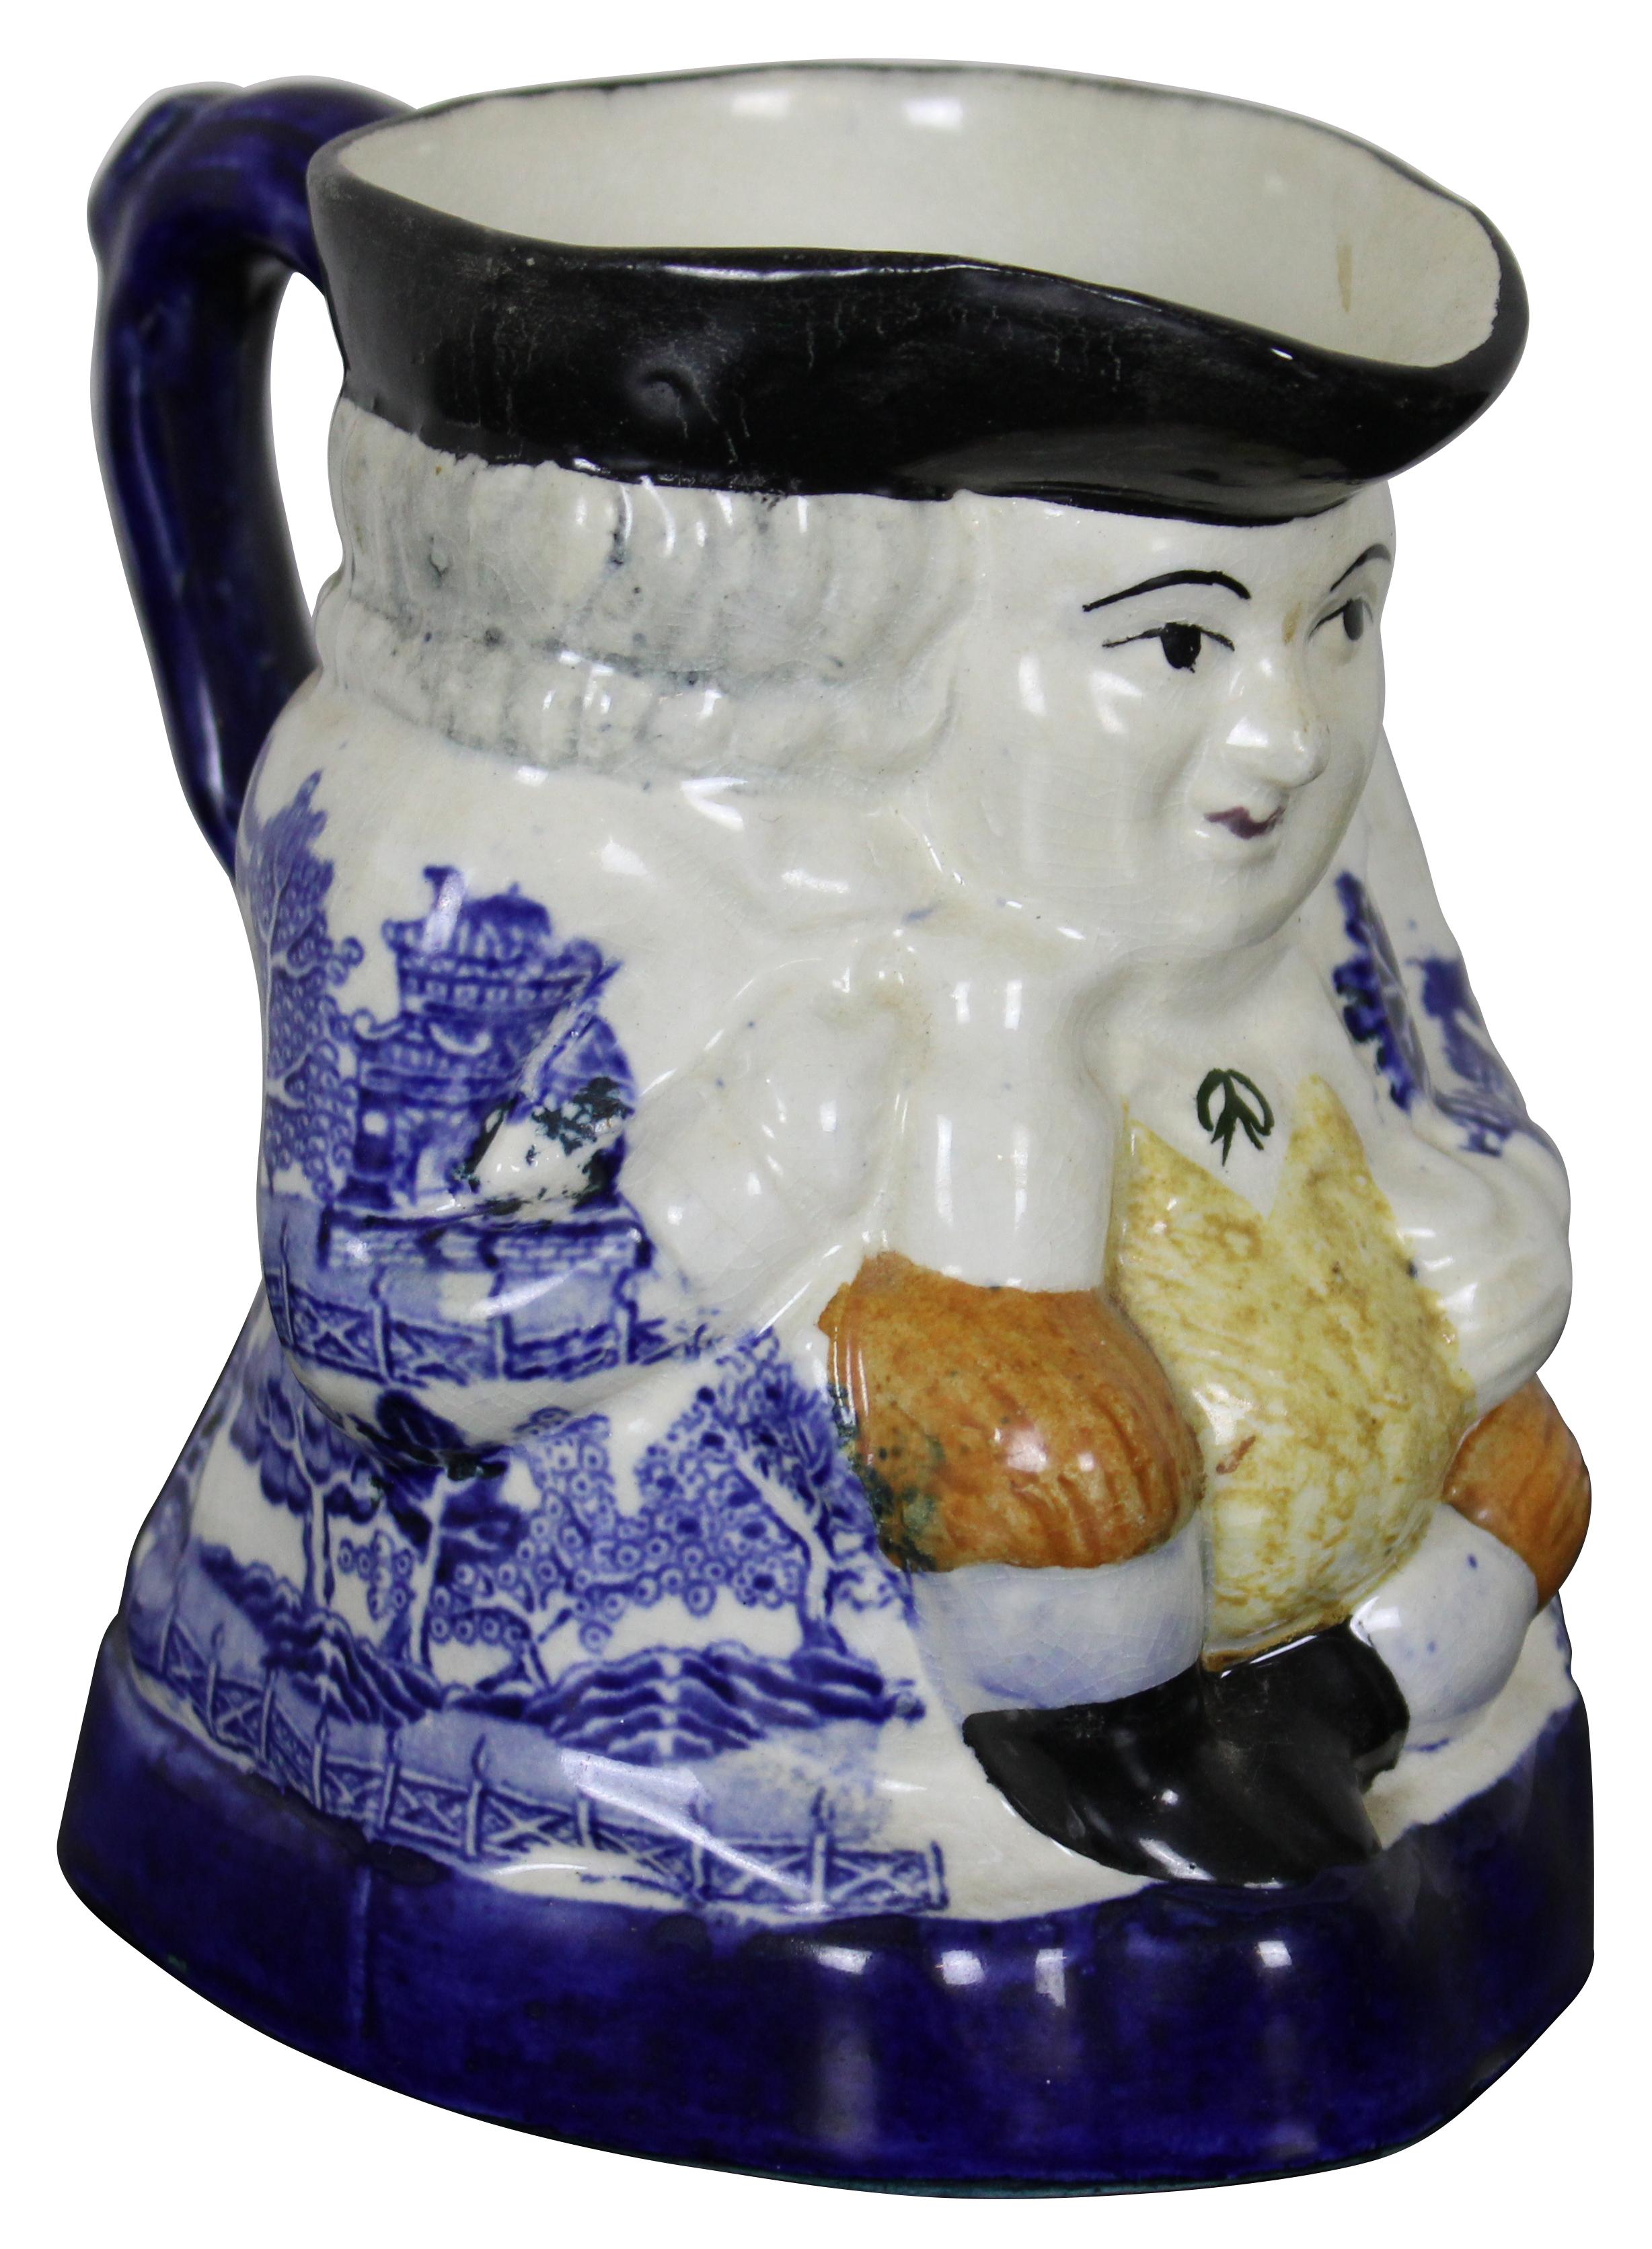 Federal Antique Old Staffordshire Blue Willow Toby Jug Pitcher Colonial Englishman